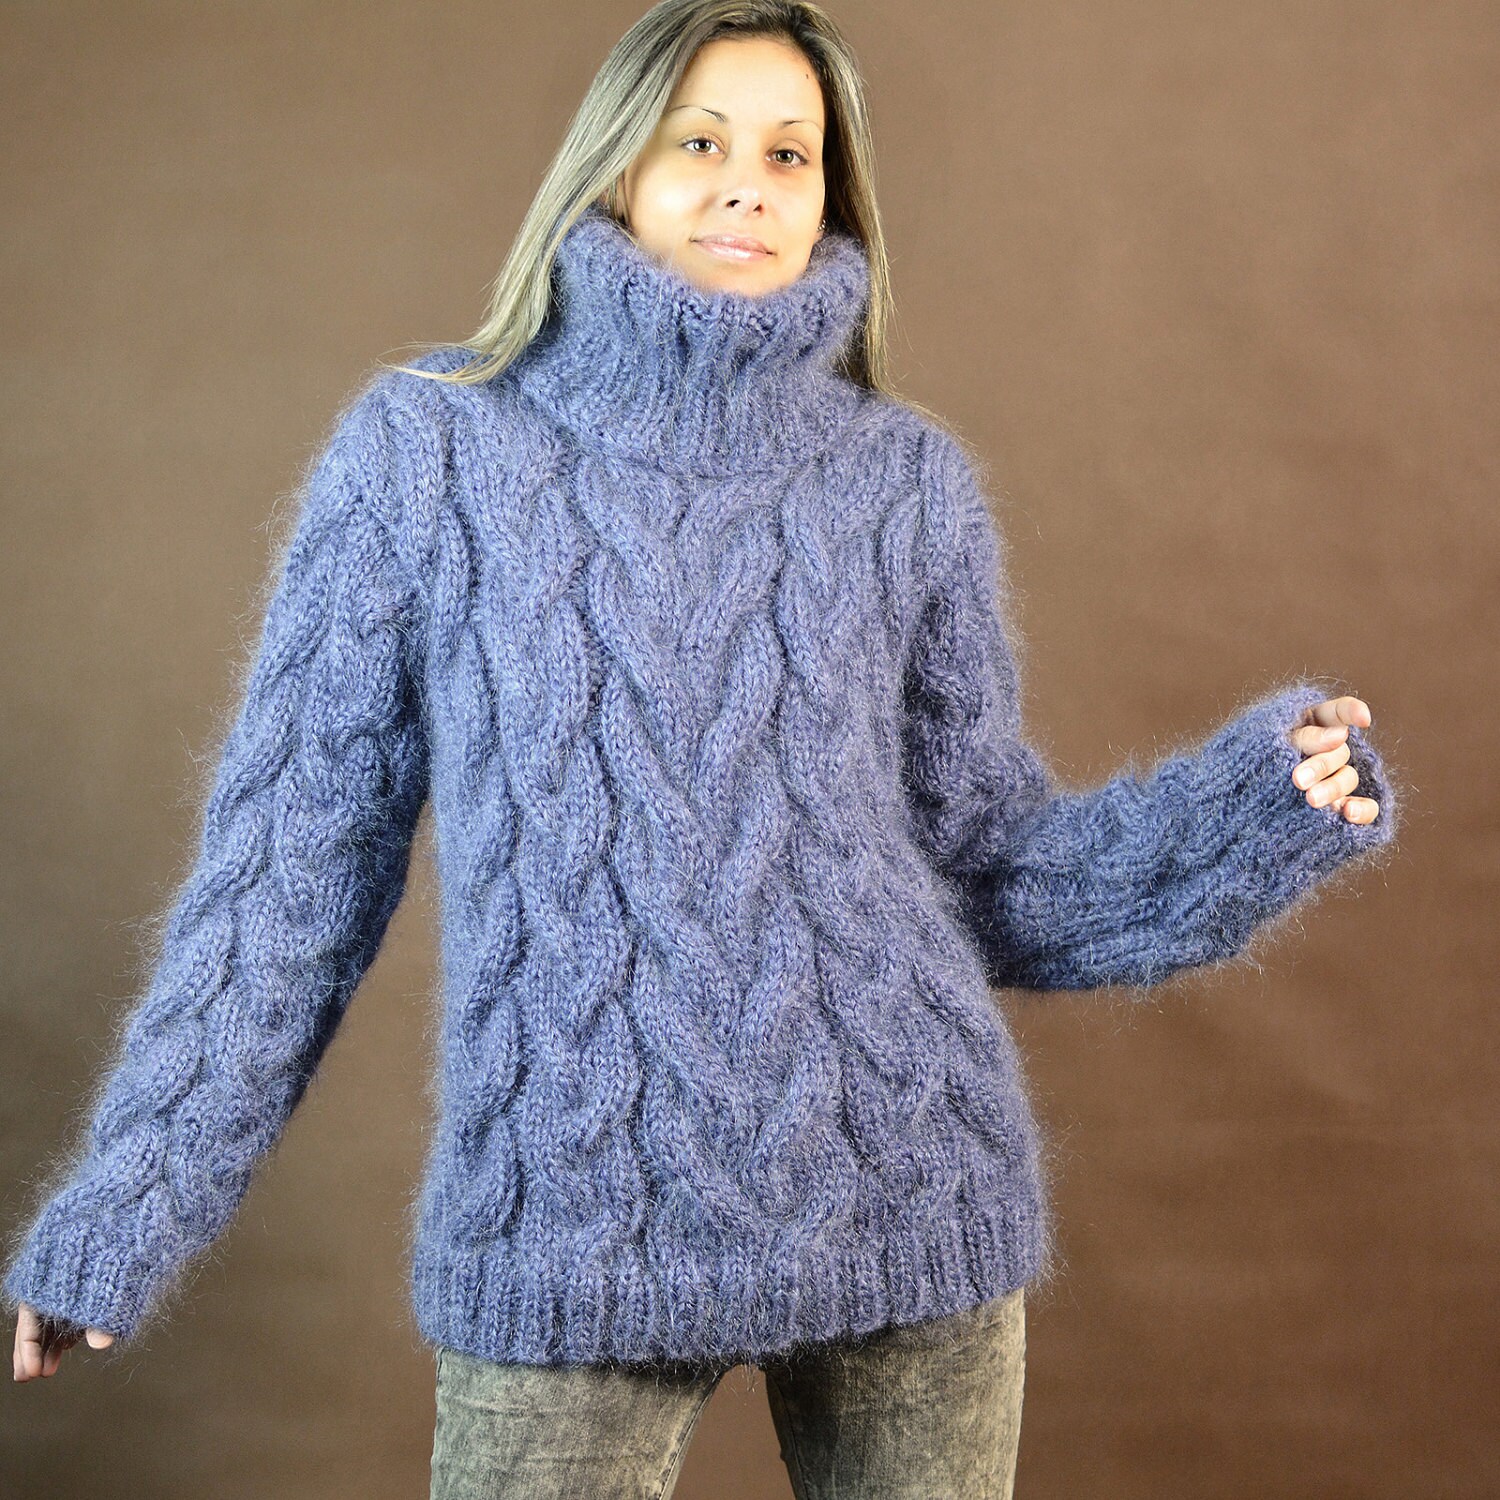 Cable Hand Knitted Mohair Sweater Denim Blue color Fuzzy | Etsy